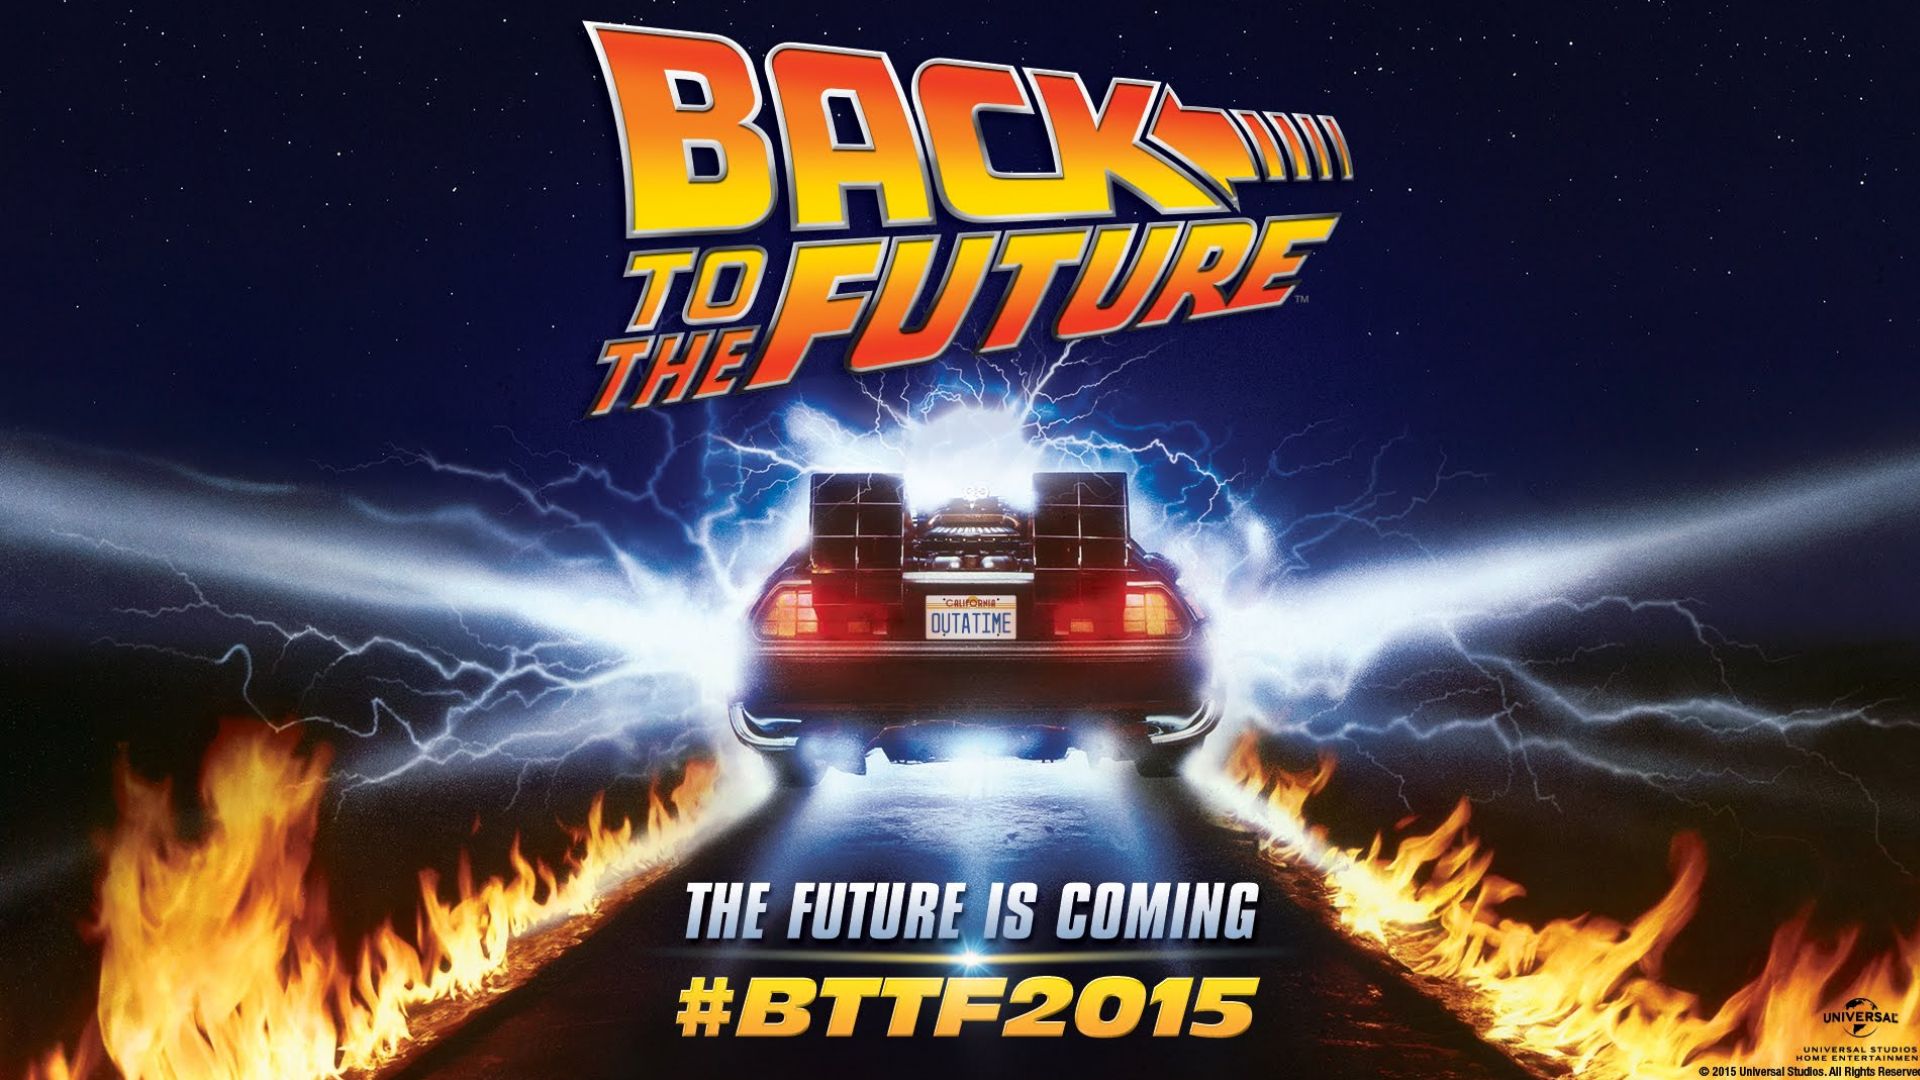 Back To The Future 30th Anniversary Trilogy coming on Blu-ray October 21